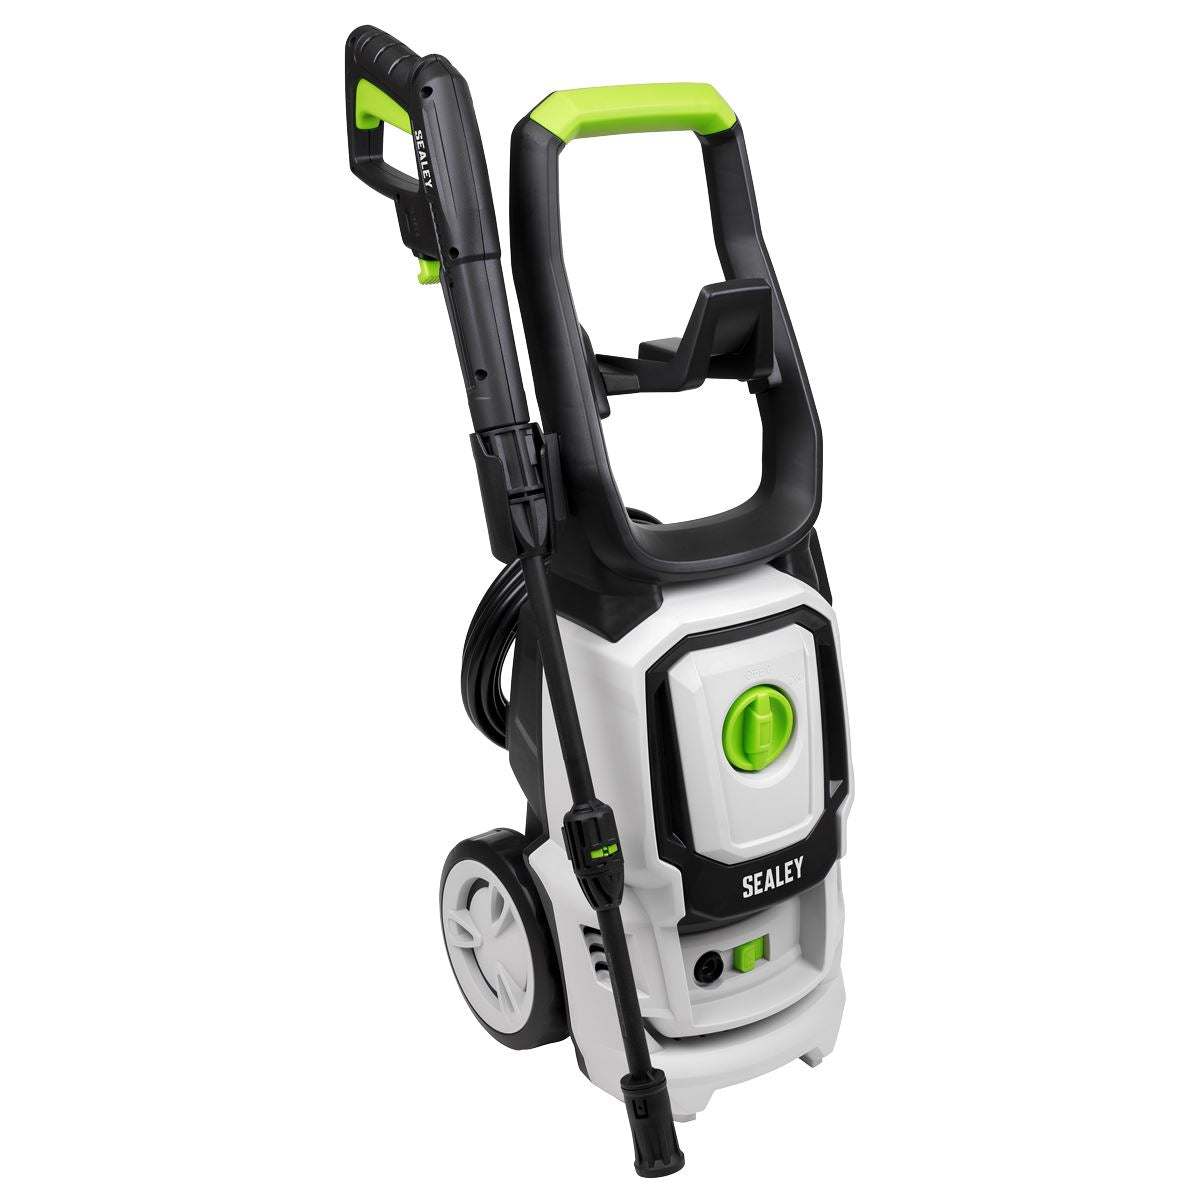 Sealey Pressure Washer 130bar 420L/hr with Snow Foam PW1860COMBO